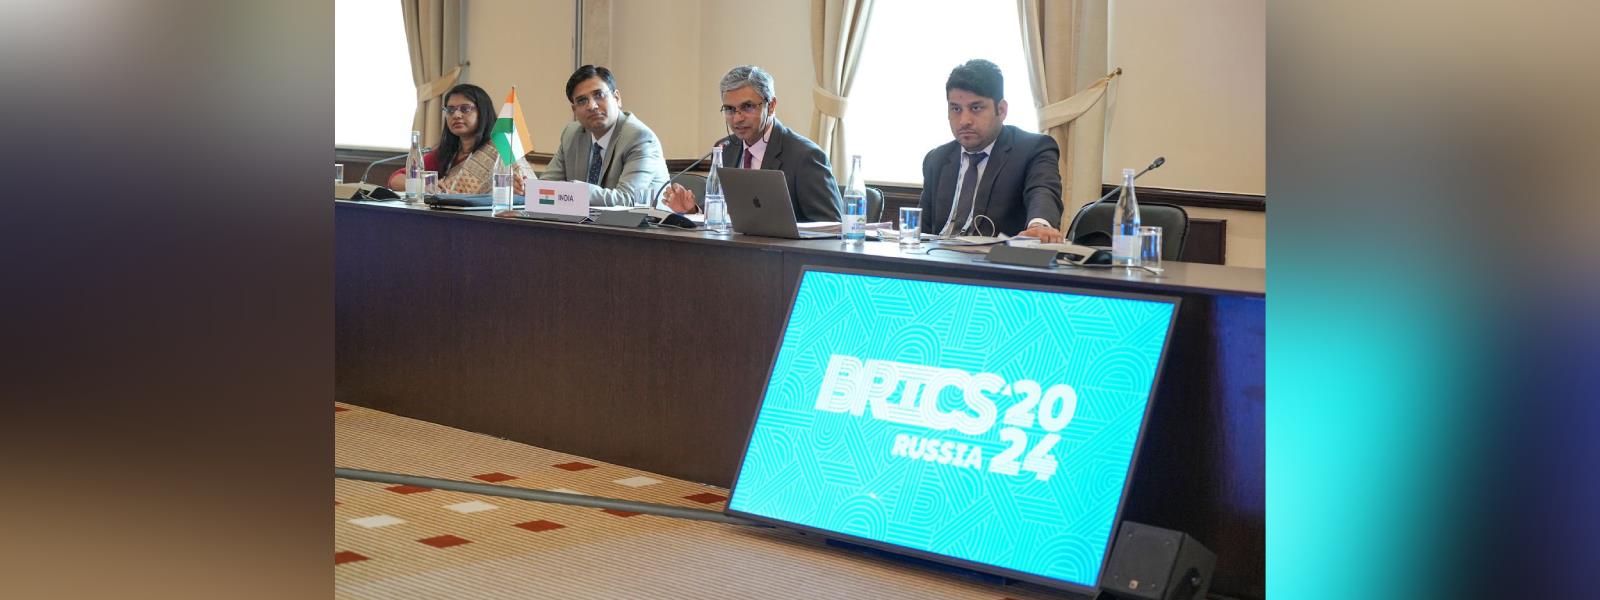 Officer on Special Duty (ER & DPA), Shri P. Kumaran led the Indian delegation at the 2nd BRICS Sherpas and Sous-Sherpas meeting in Moscow